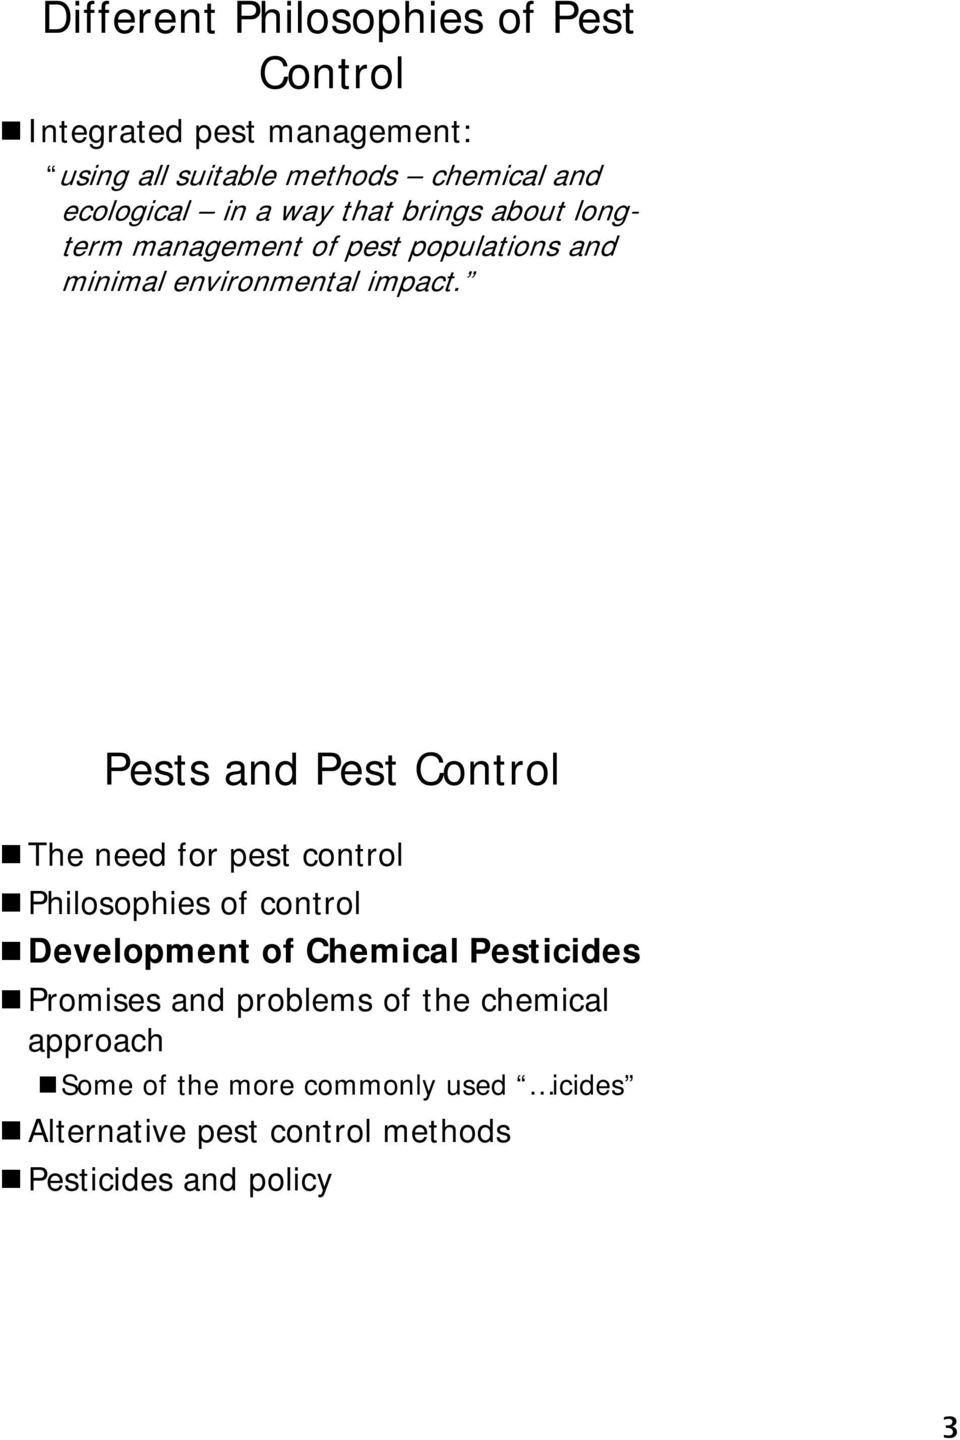 Pests and Pest Control The need for pest control Philosophies of control Development of Chemical Pesticides Promises